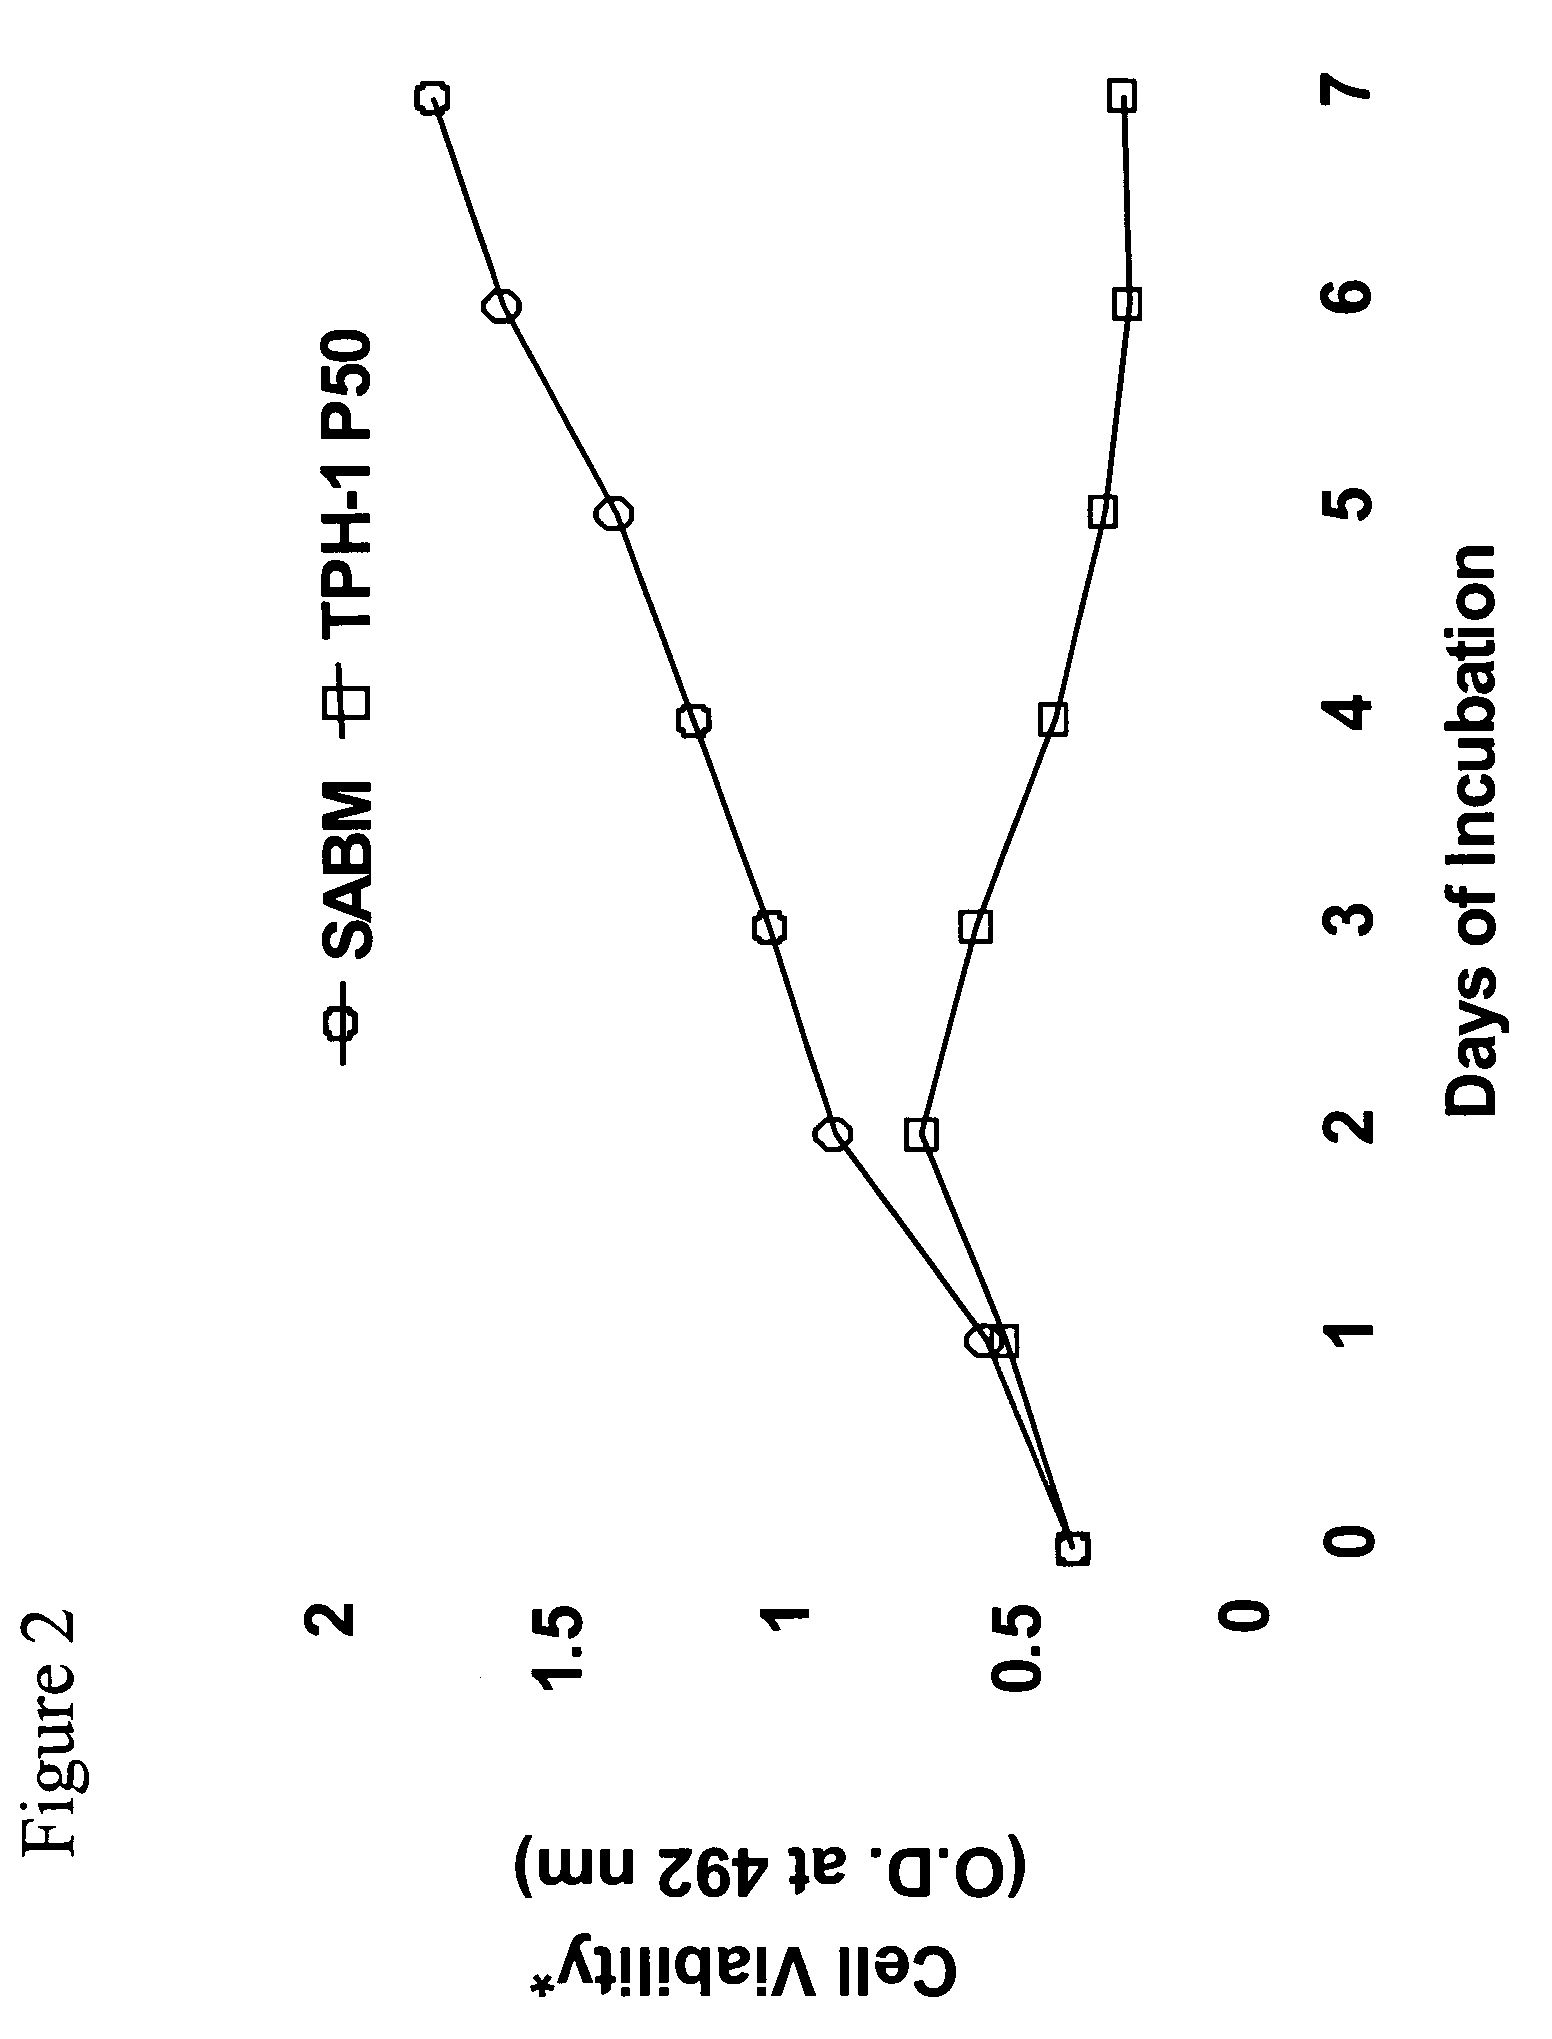 Method of manufacturing a stellate cell death factor